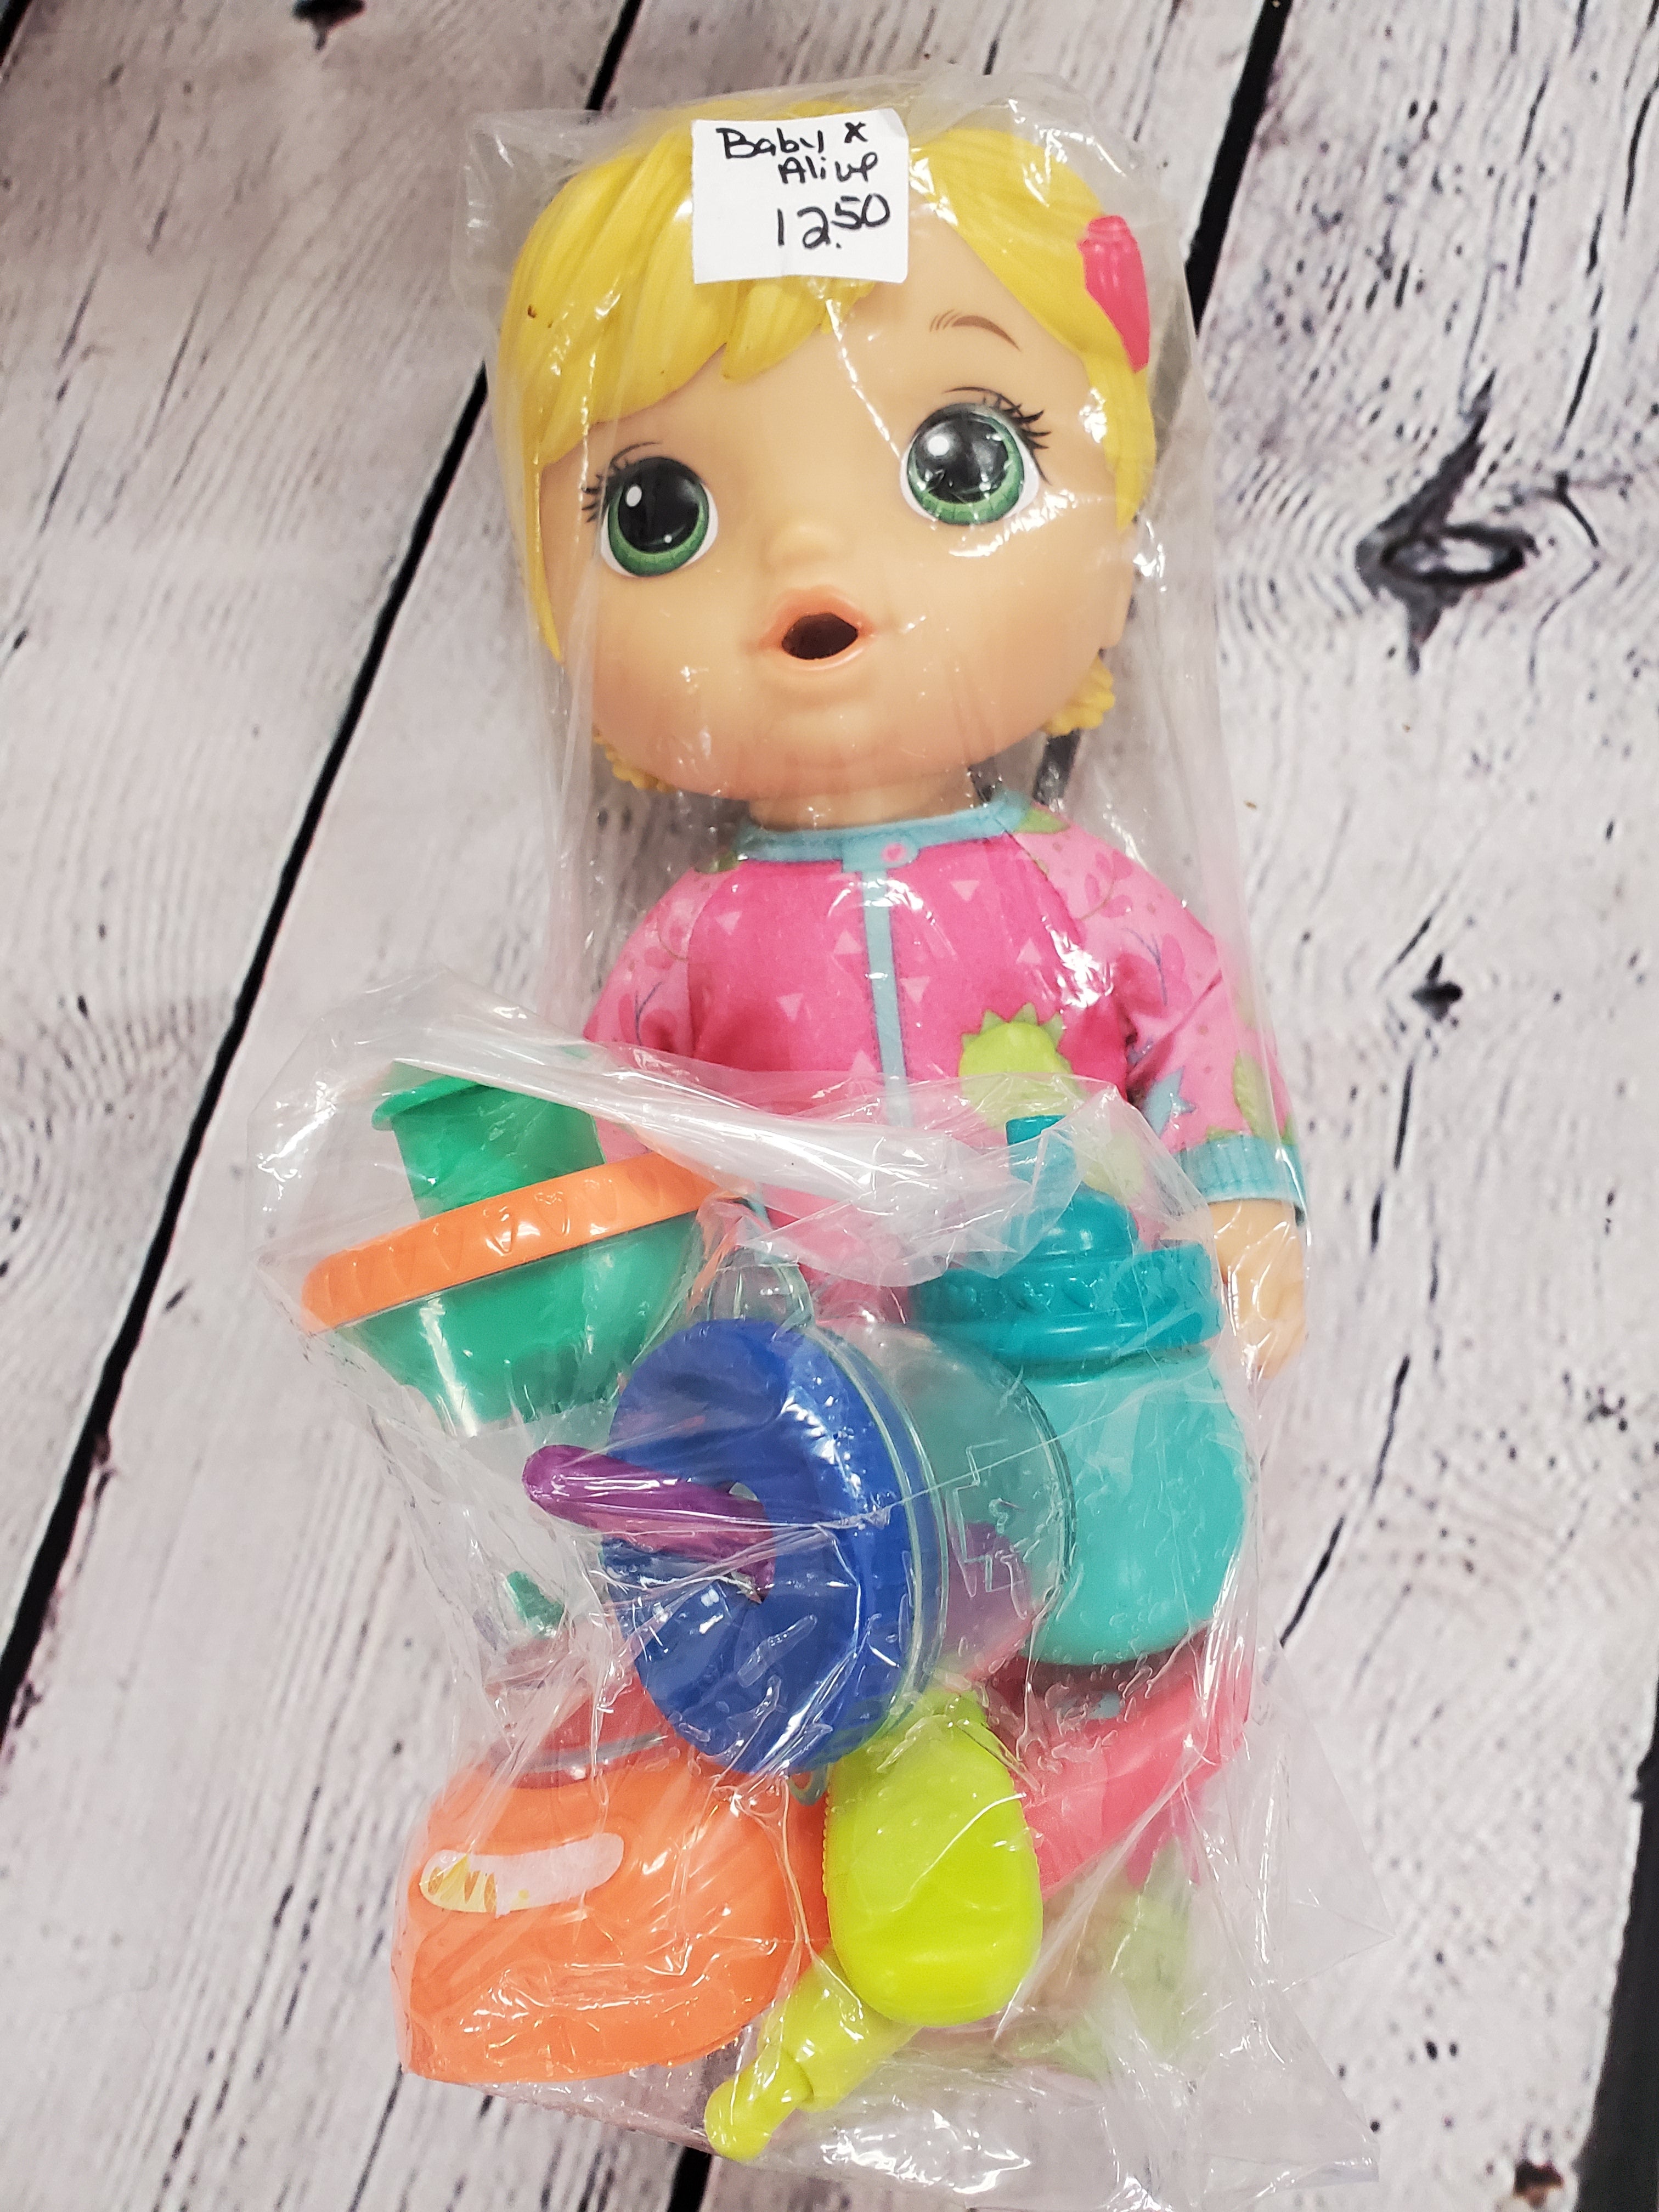 Baby Alive doll with accessories